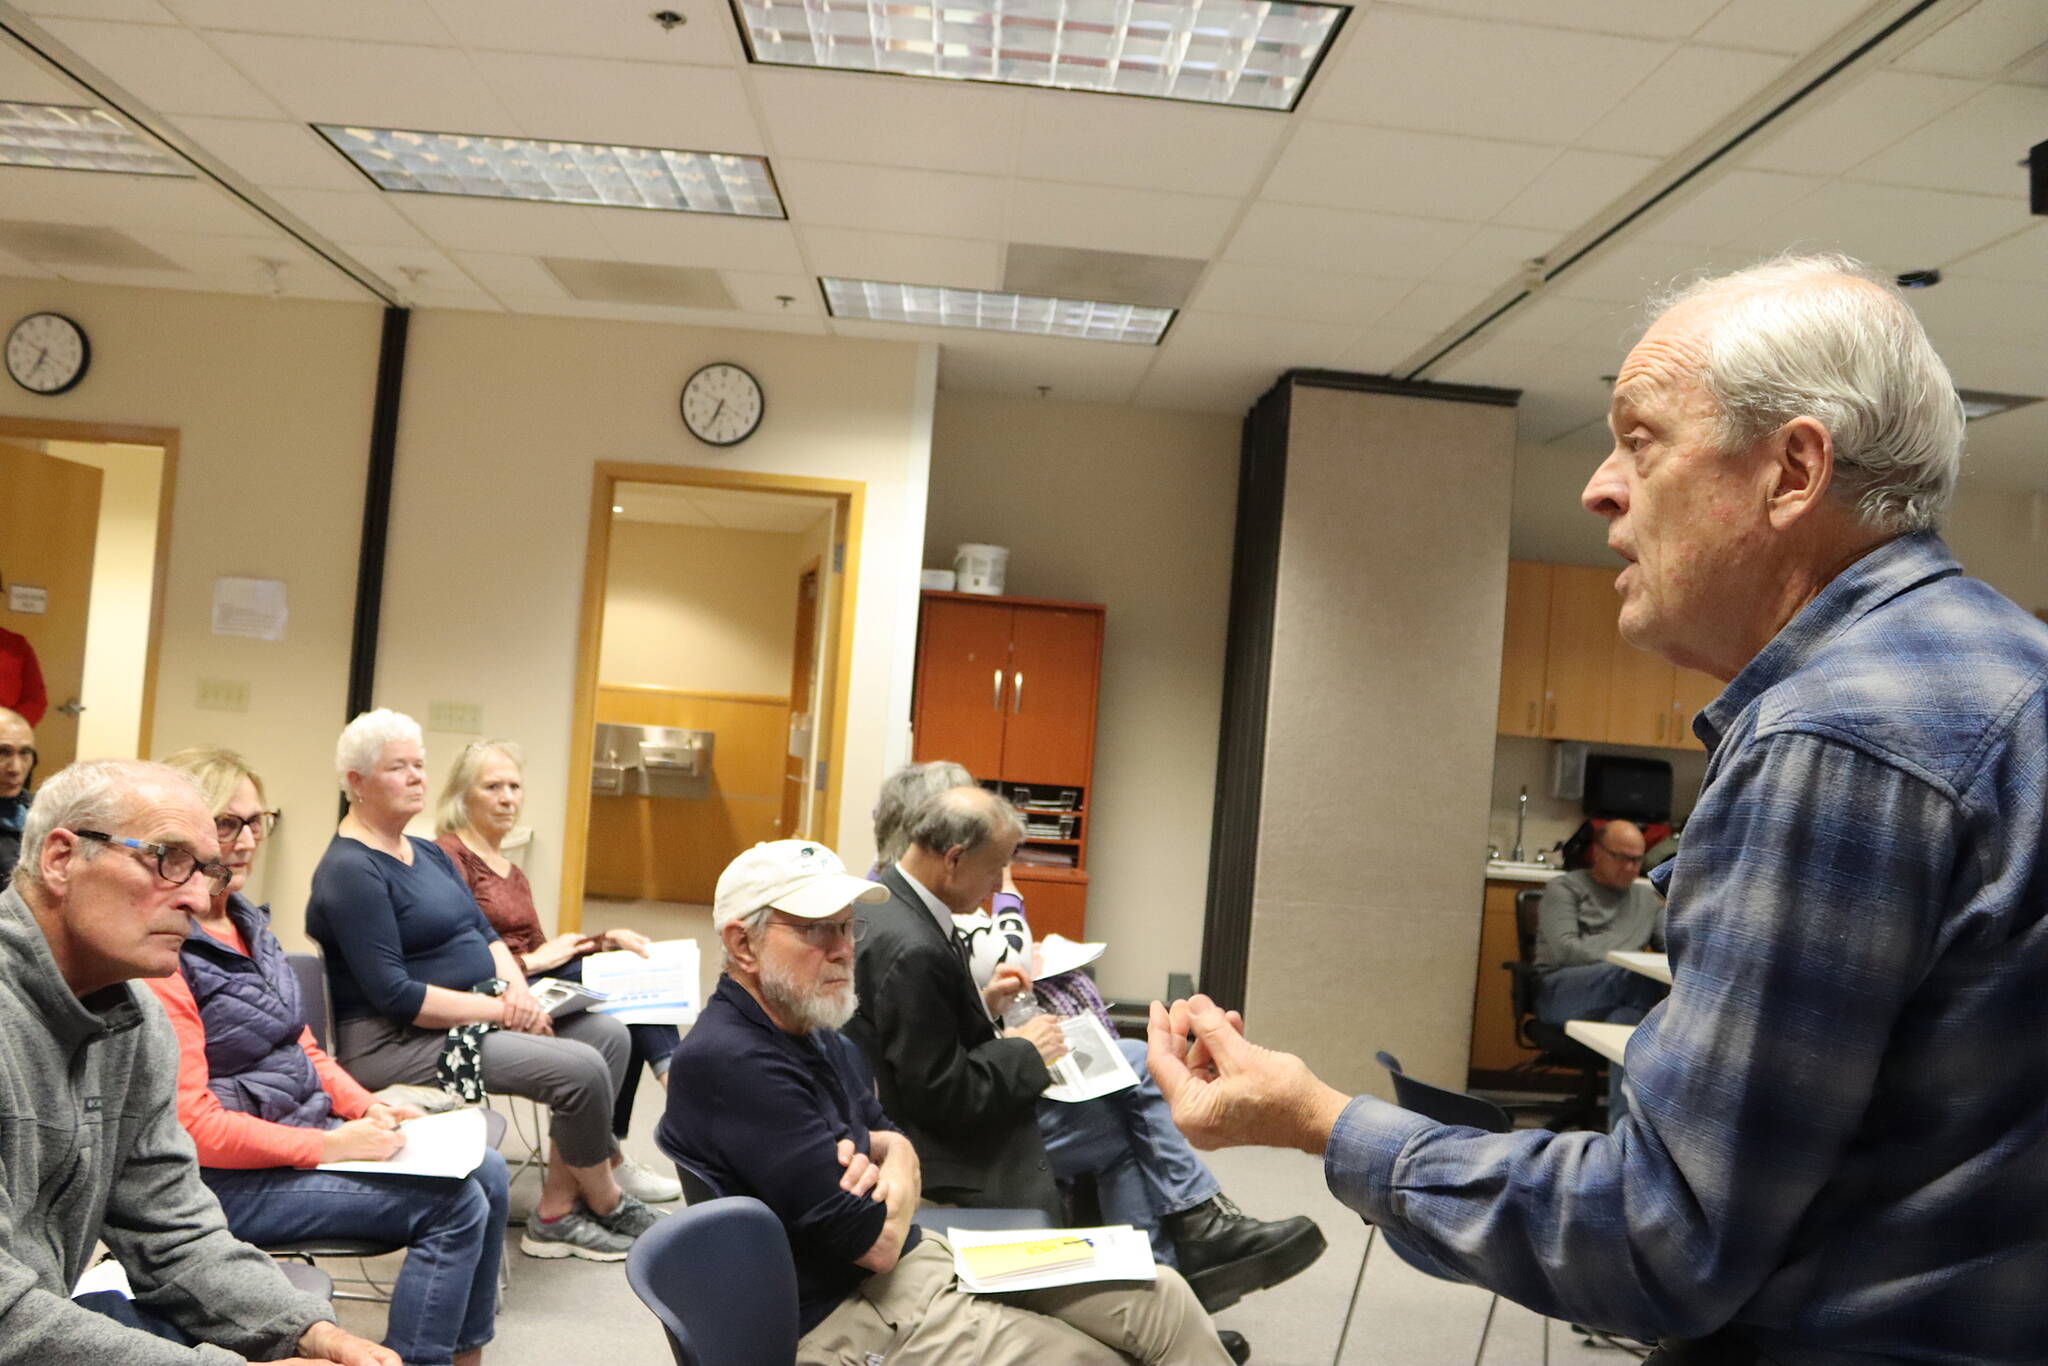 Quigley Peterson, a longtime doctor at Bartlett Regional Hospital, speaks in favor of its hospice and home health programs during a public forum at the hospital Tuesday to get feedback on proposed cuts to certain programs. (Mark Sabbatini / Juneau Empire)